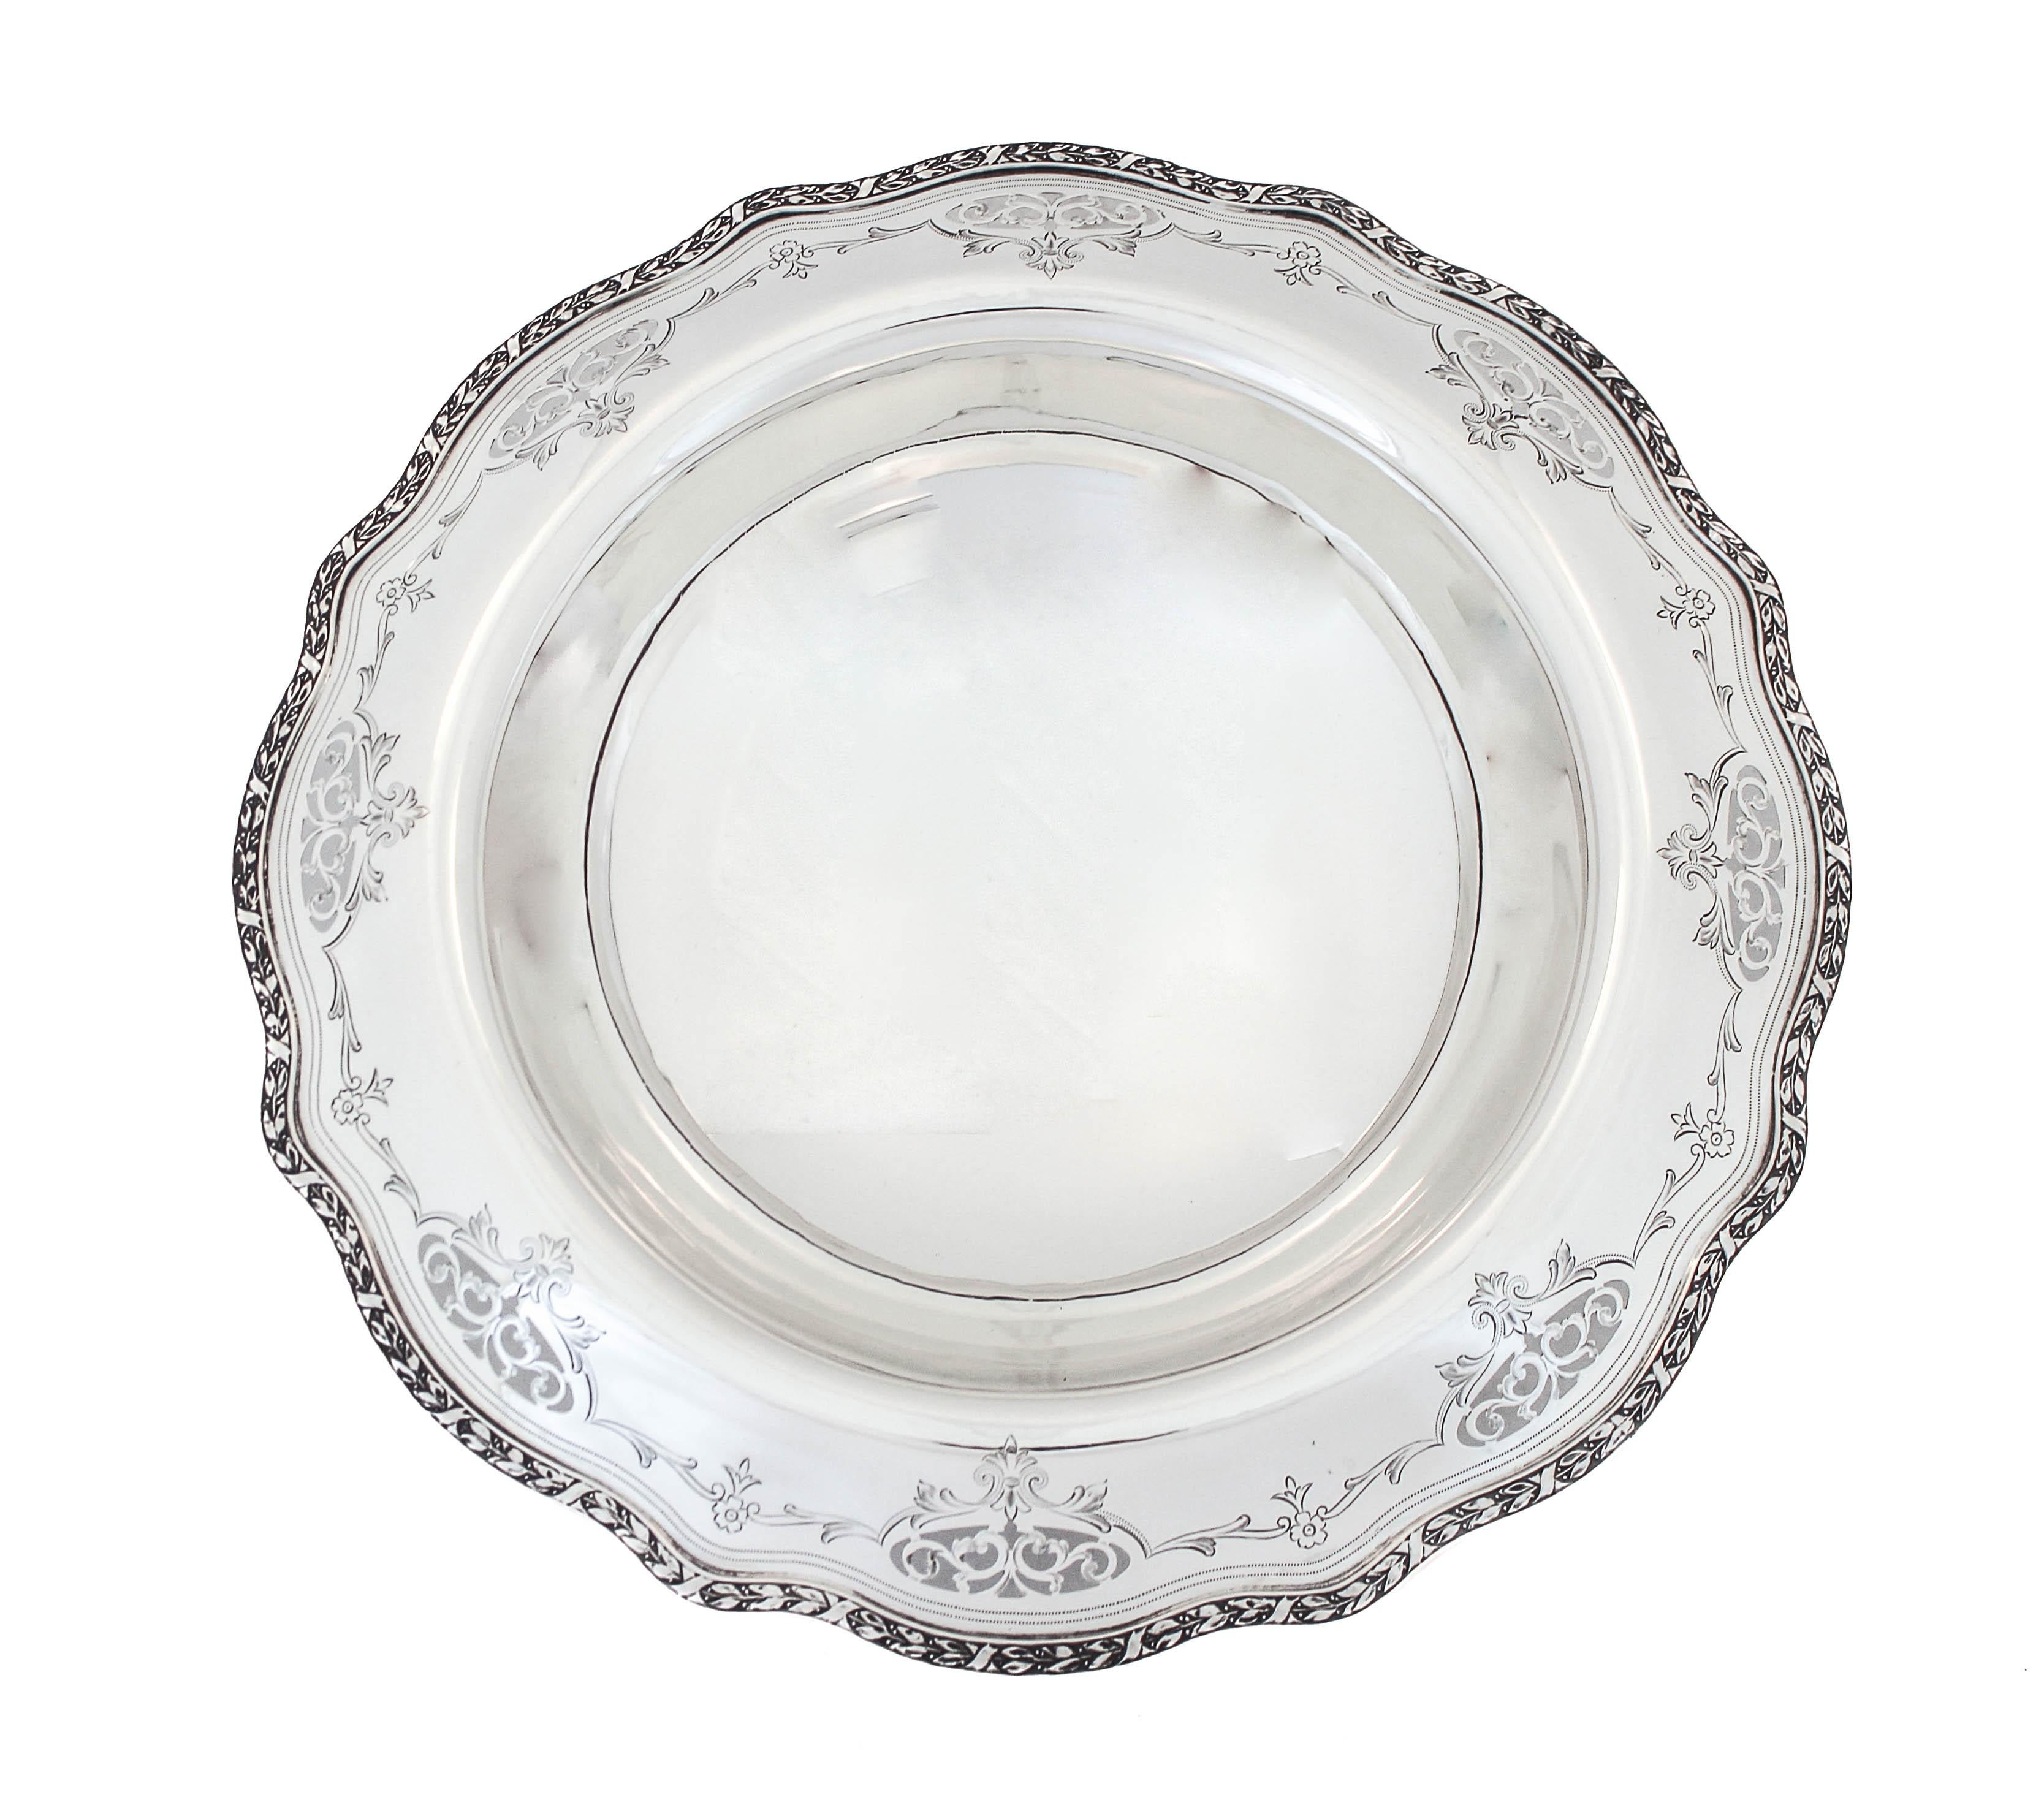 Being offered is a sterling silver centerpiece bowl made by Wallace Silversmiths from the mid nineteenth century.  It is raised on a pedestal and has a wide two-inch rim that is scalloped and has a cutout design.  Even when filled the beautiful edge